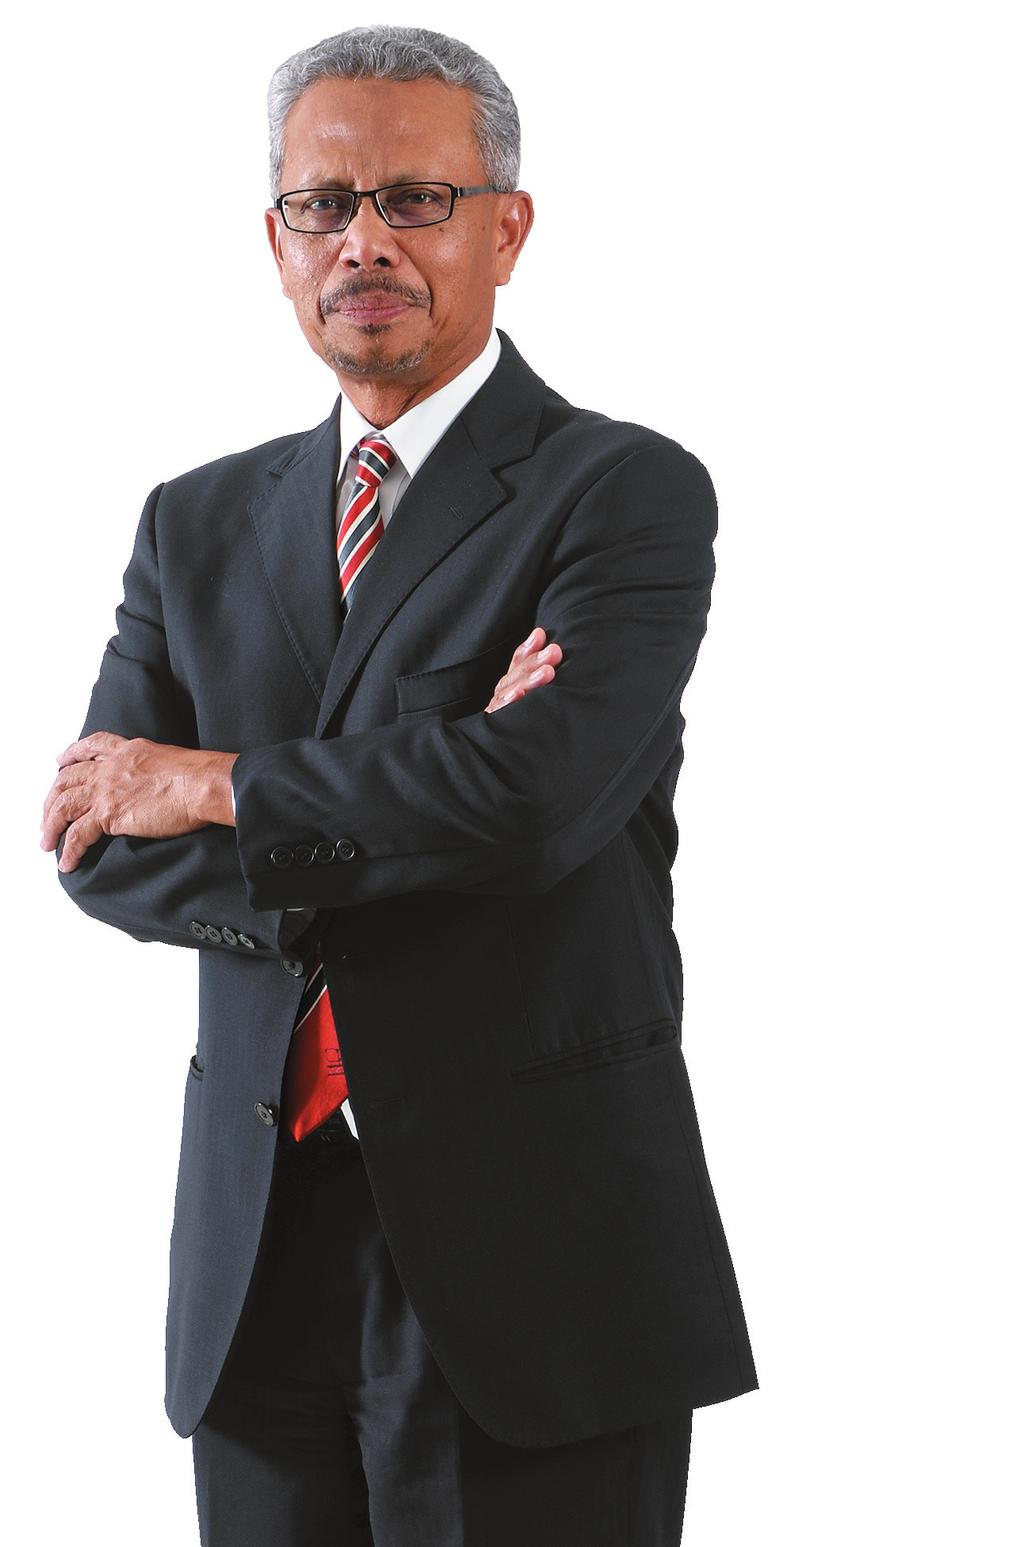 BOARD OF DIRECTORS KHALID BIN SUFAT Age : 62 years Gender : Male Senior Independent Non-Executive Director 11 October 2010 Chairman, Audit and Compliance Chairman, Nomination and Remuneration UMW